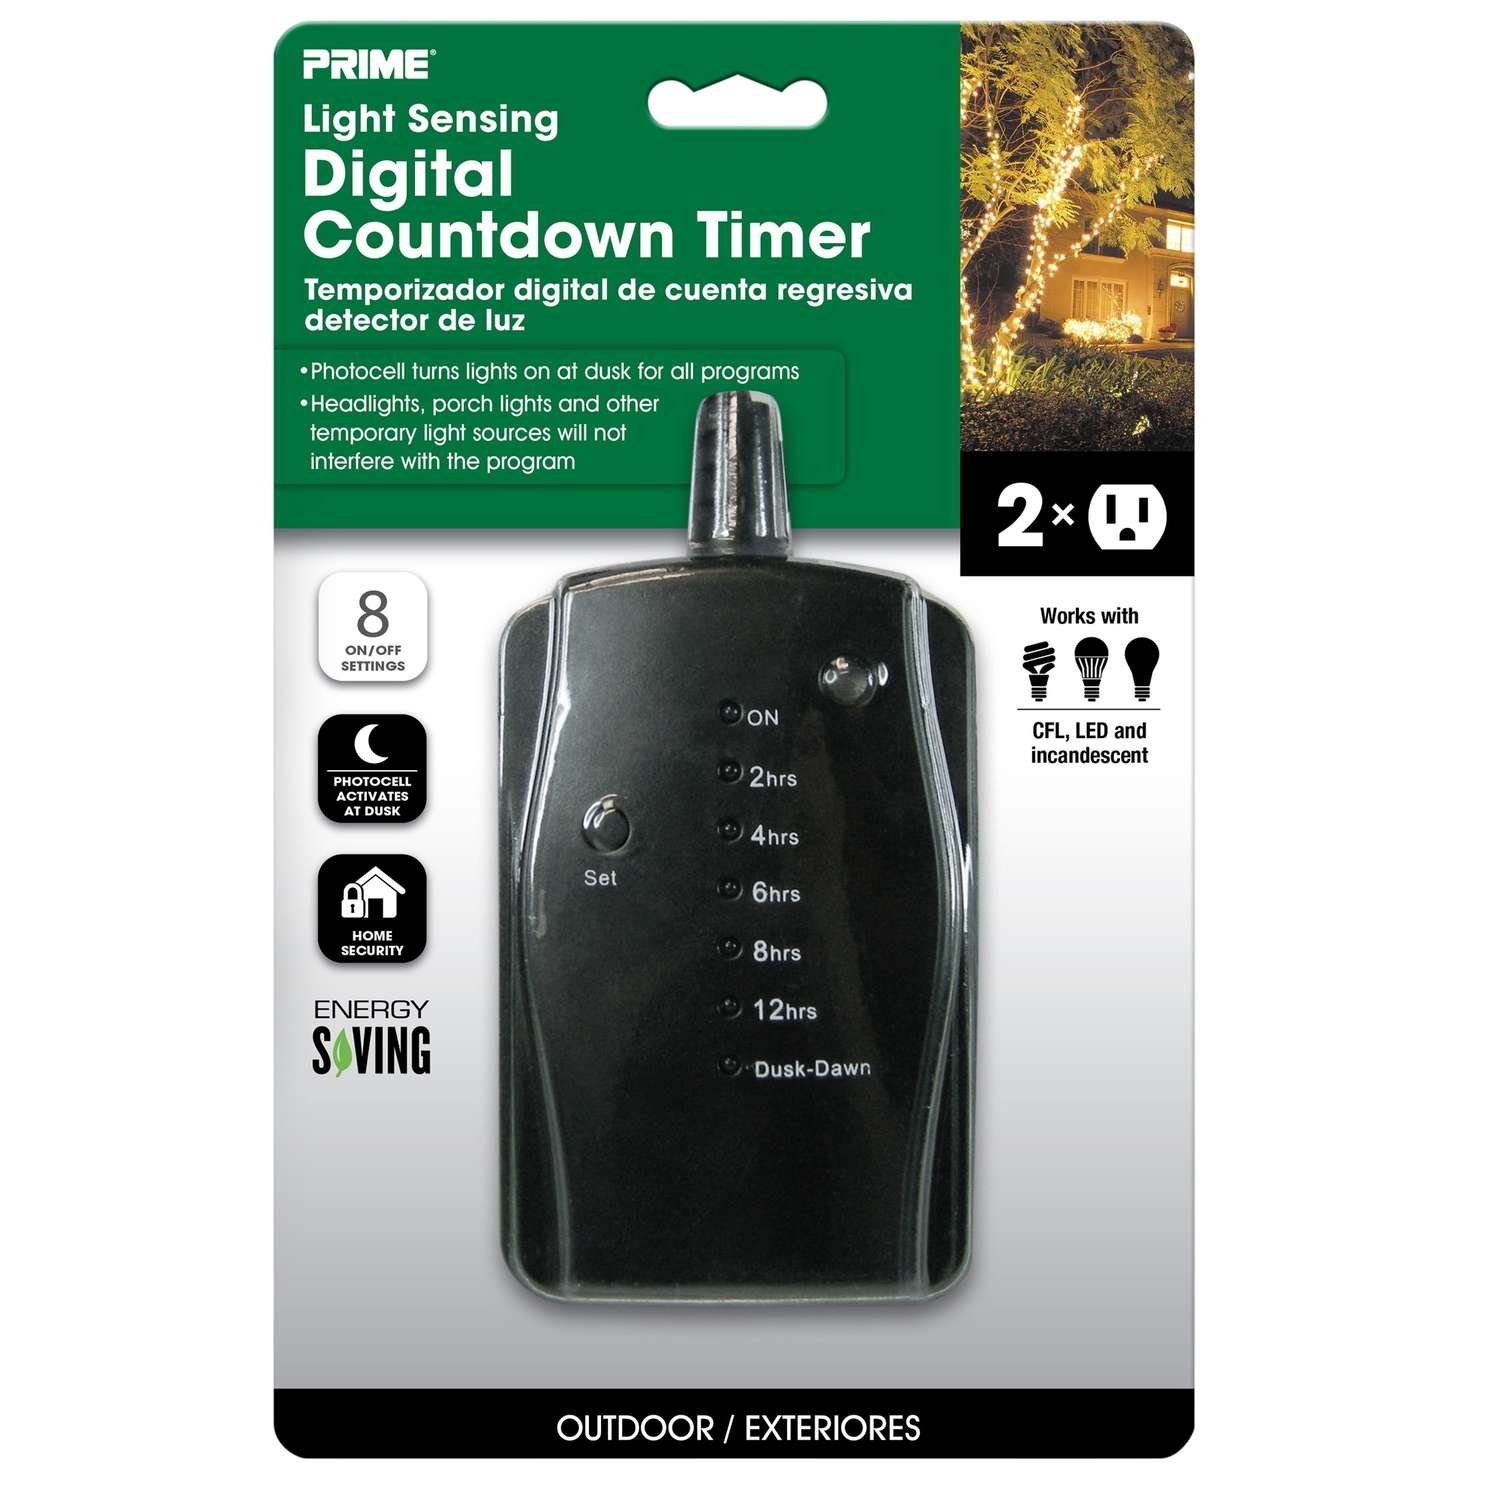 Prime Outdoor Residential Lighting Countdown Timer Remote Photocell E1 for sale online